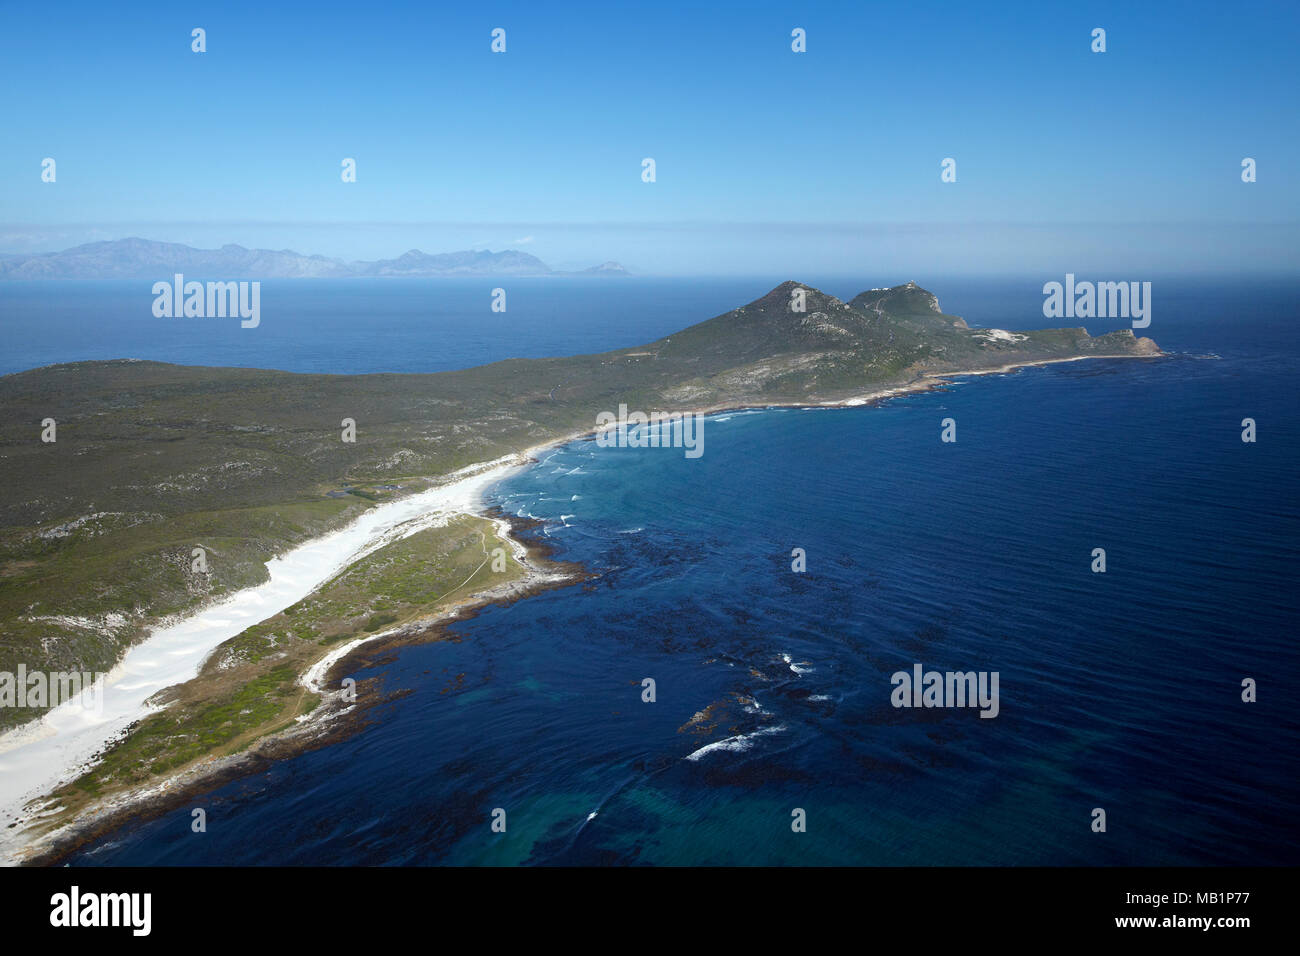 Platboom Beach and Cape of Good Hope, Cape Peninsula, Cape Town, South Africa - aerial Stock Photo